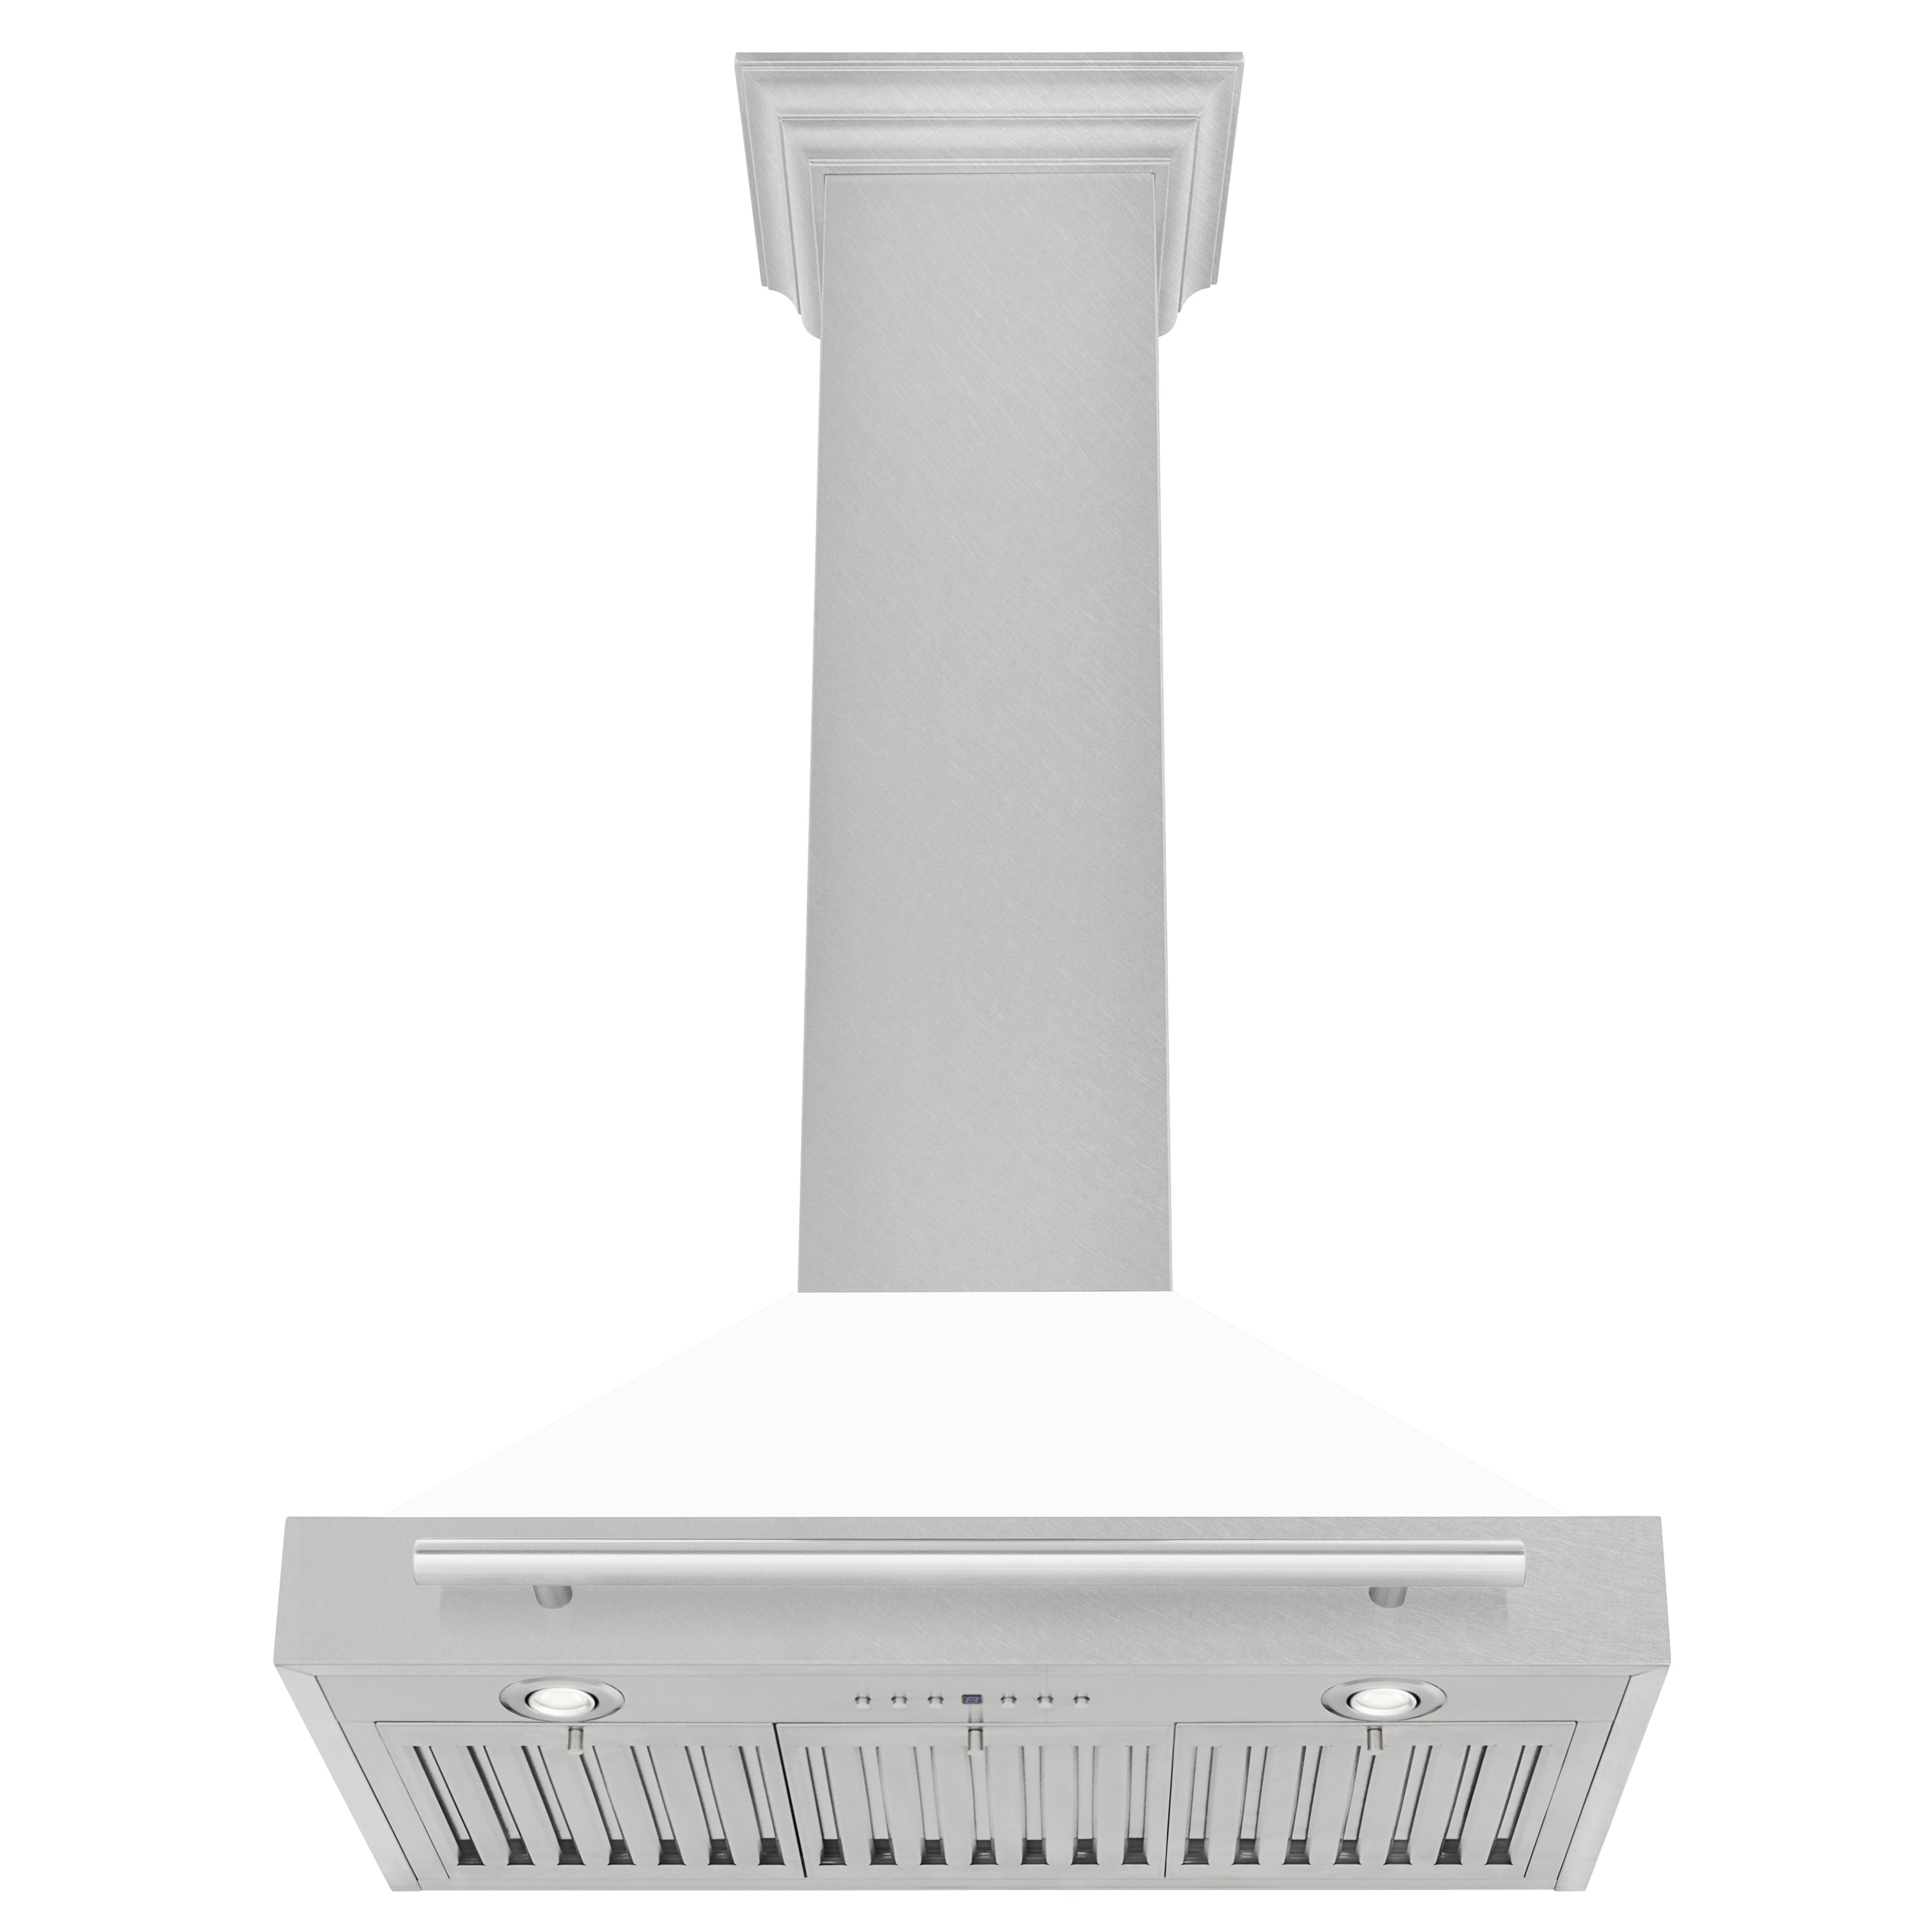 ZLINE 30 Inch DuraSnow® Stainless Steel Range Hood with White Matte Shell and Stainless Steel Handle, KB4SNX-WM-30 4